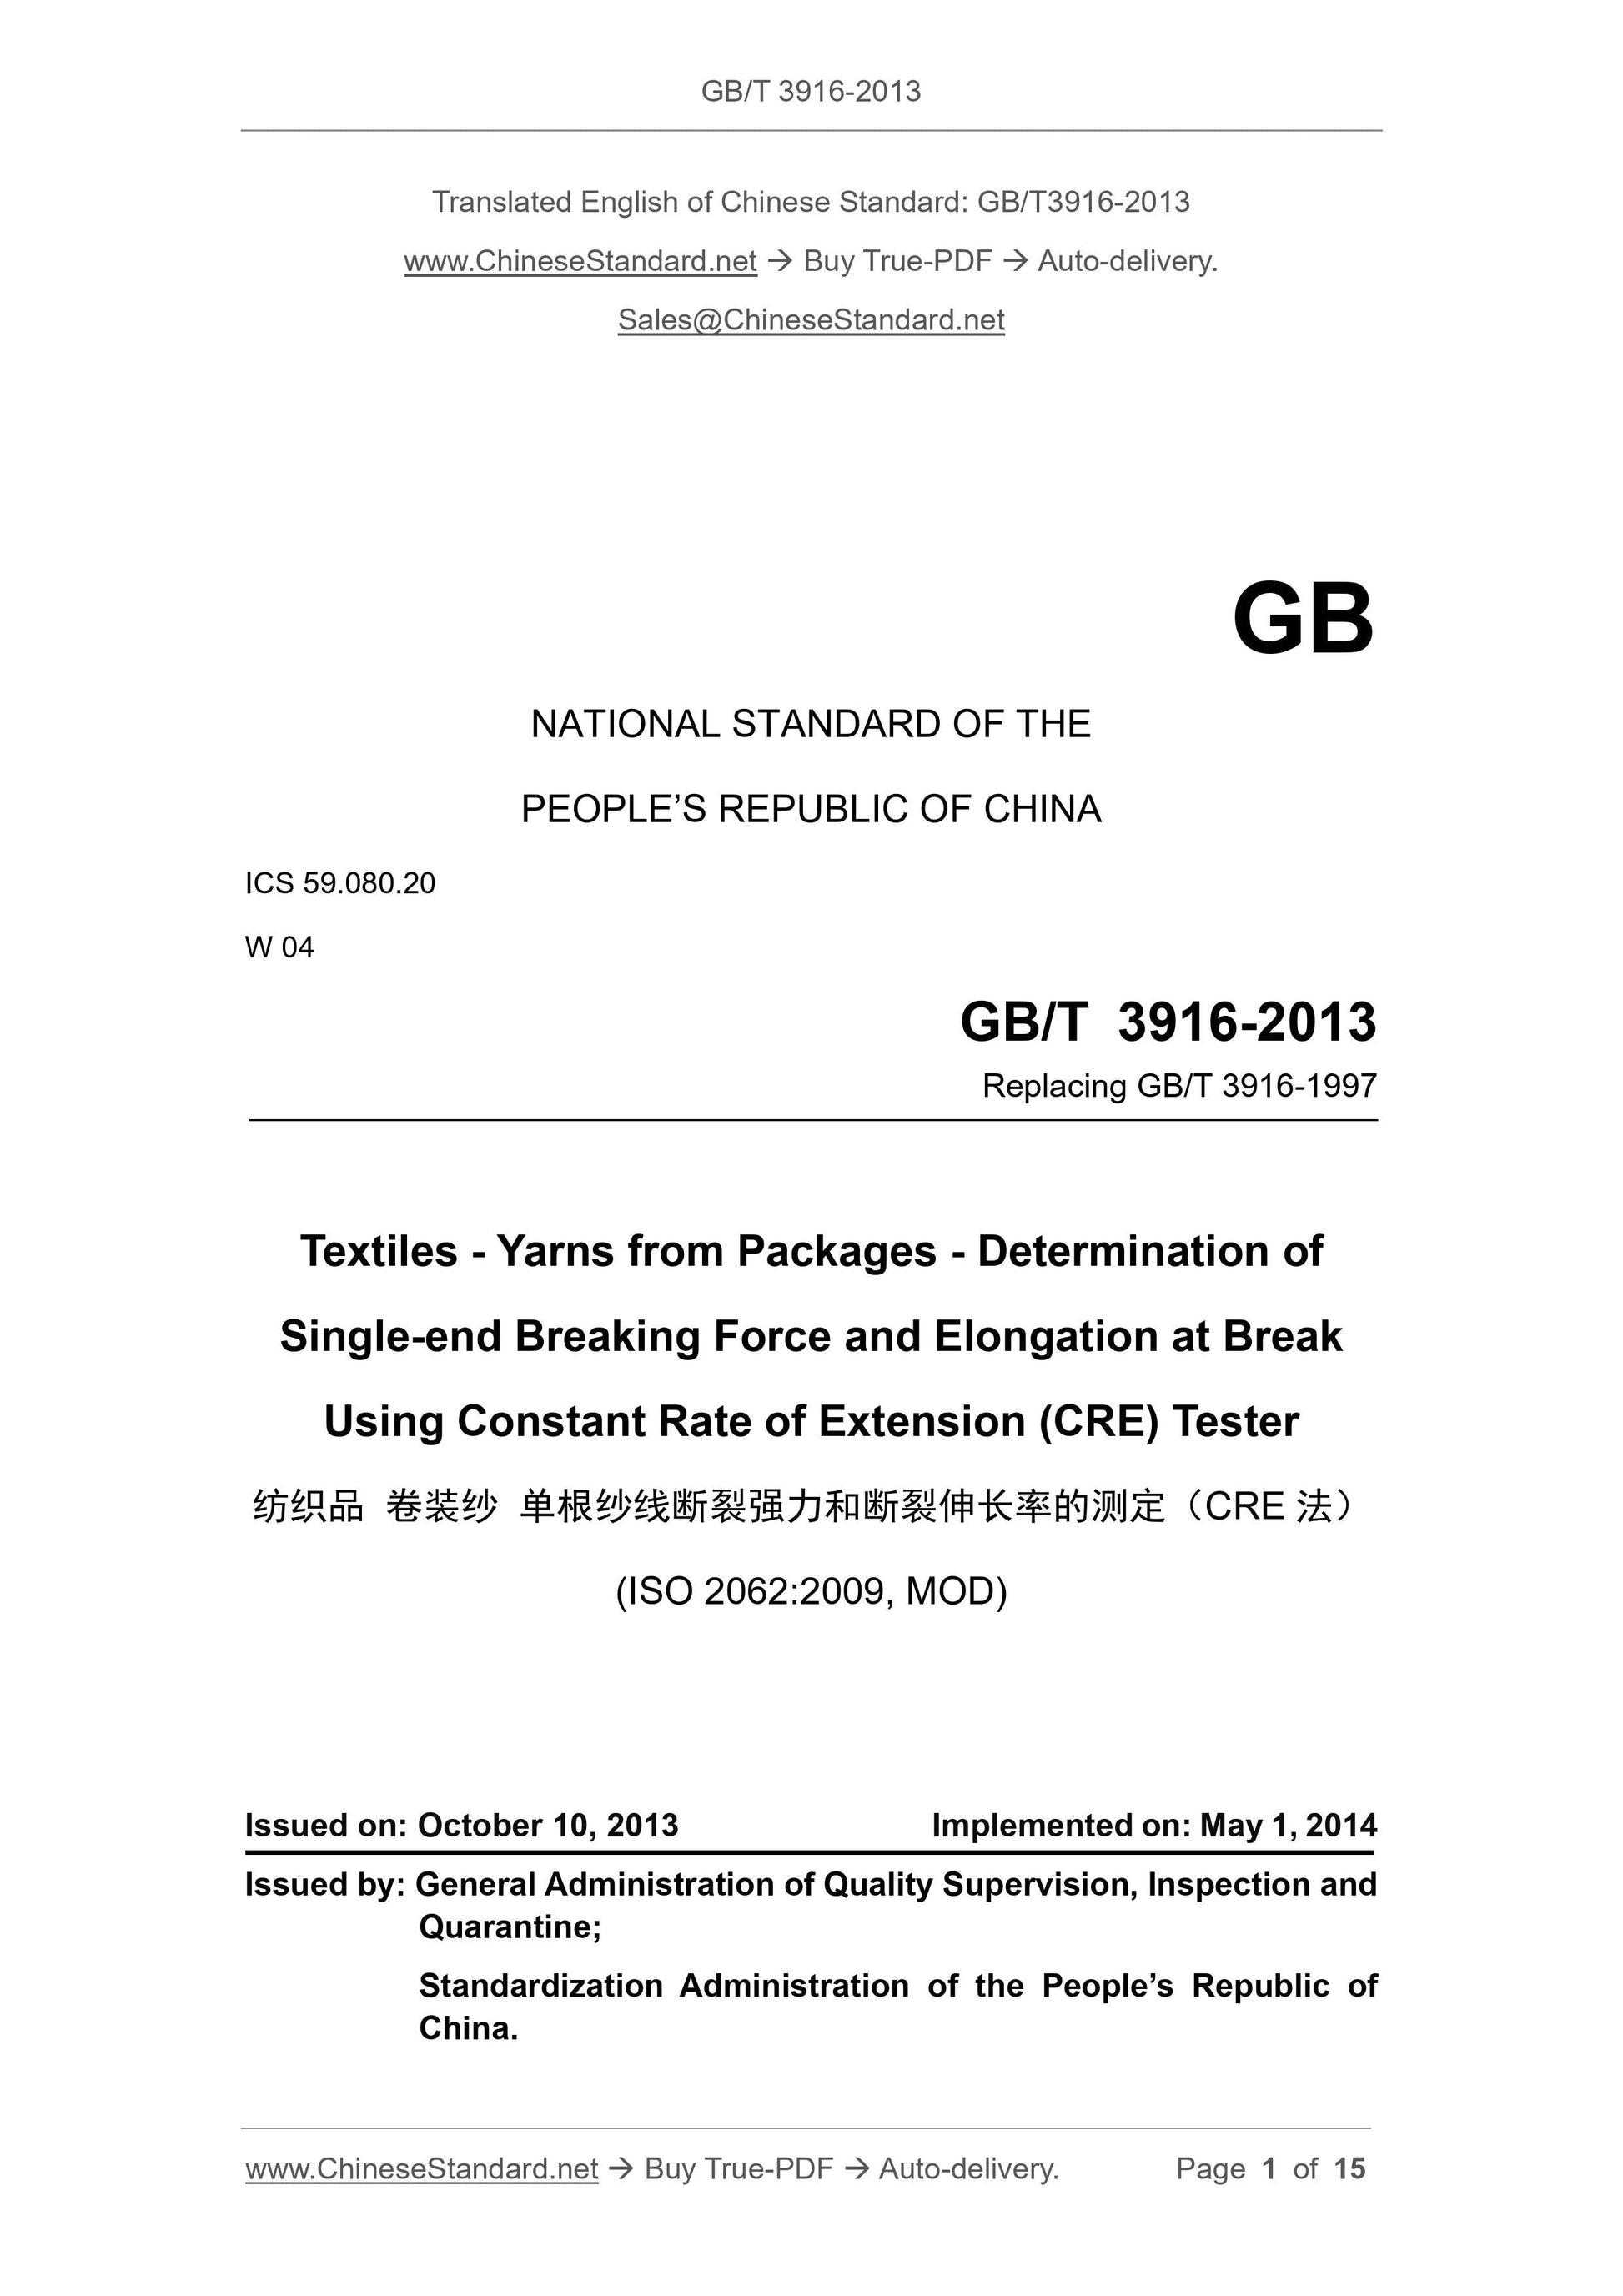 GB/T 3916-2013 Page 1